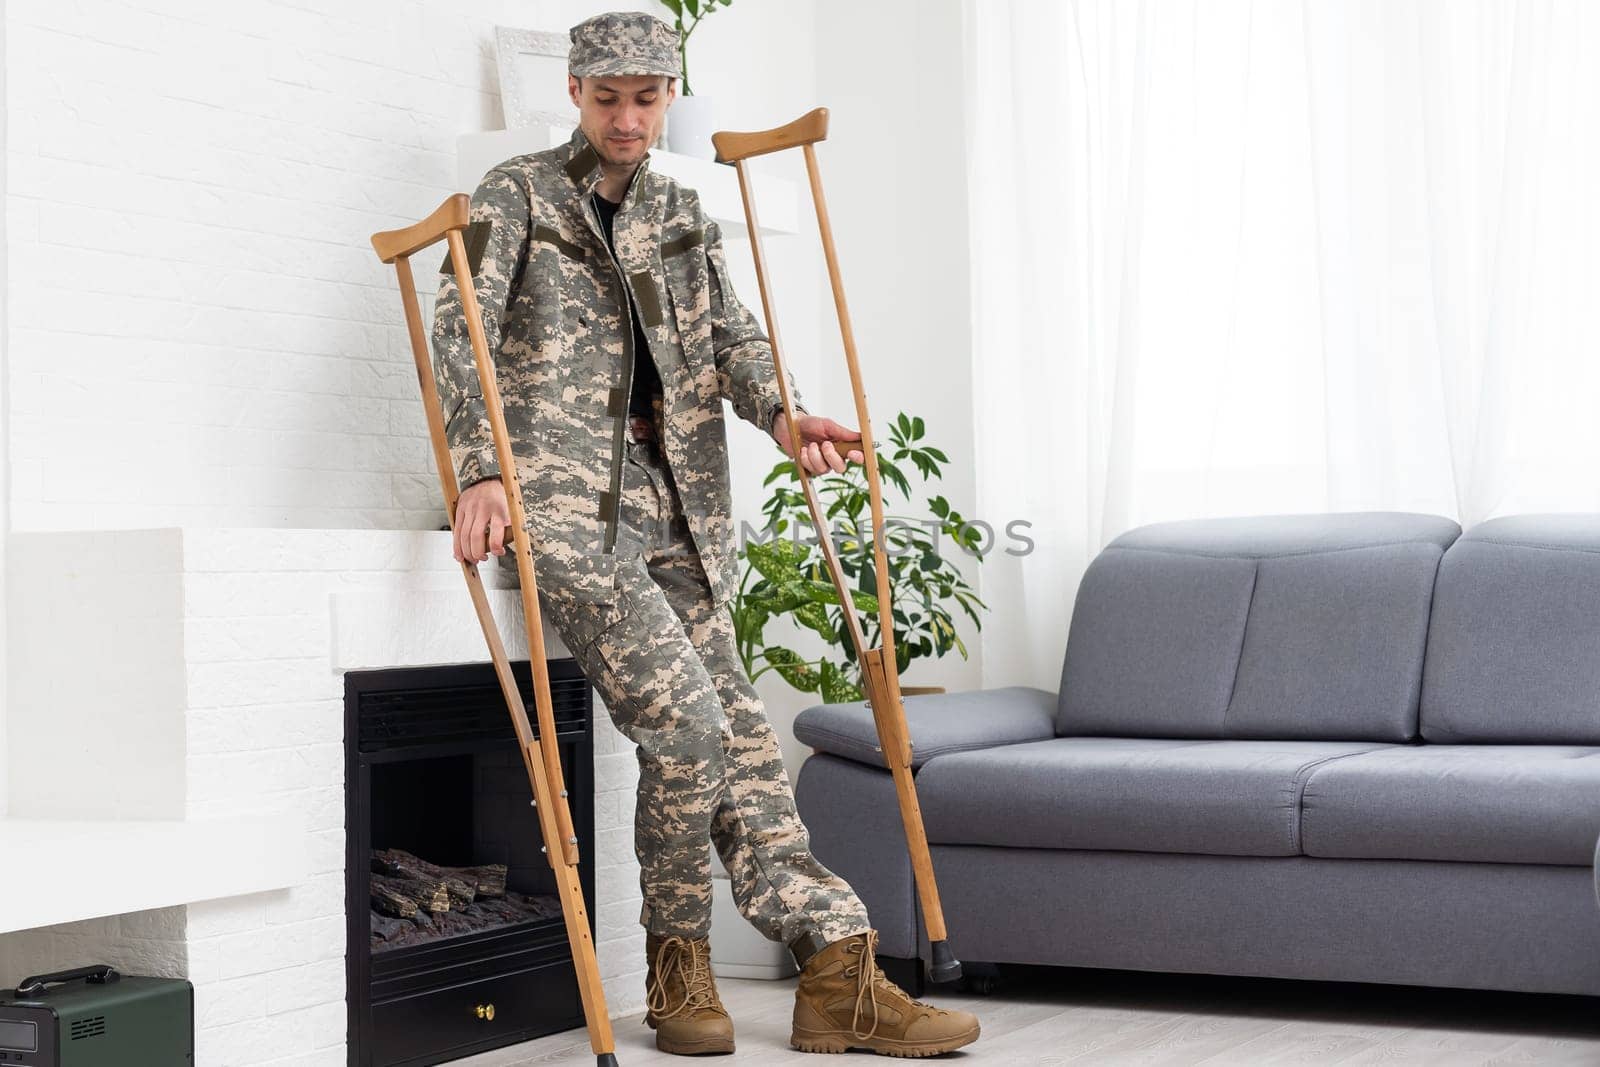 soldier in khaki military uniform on crutches by Andelov13